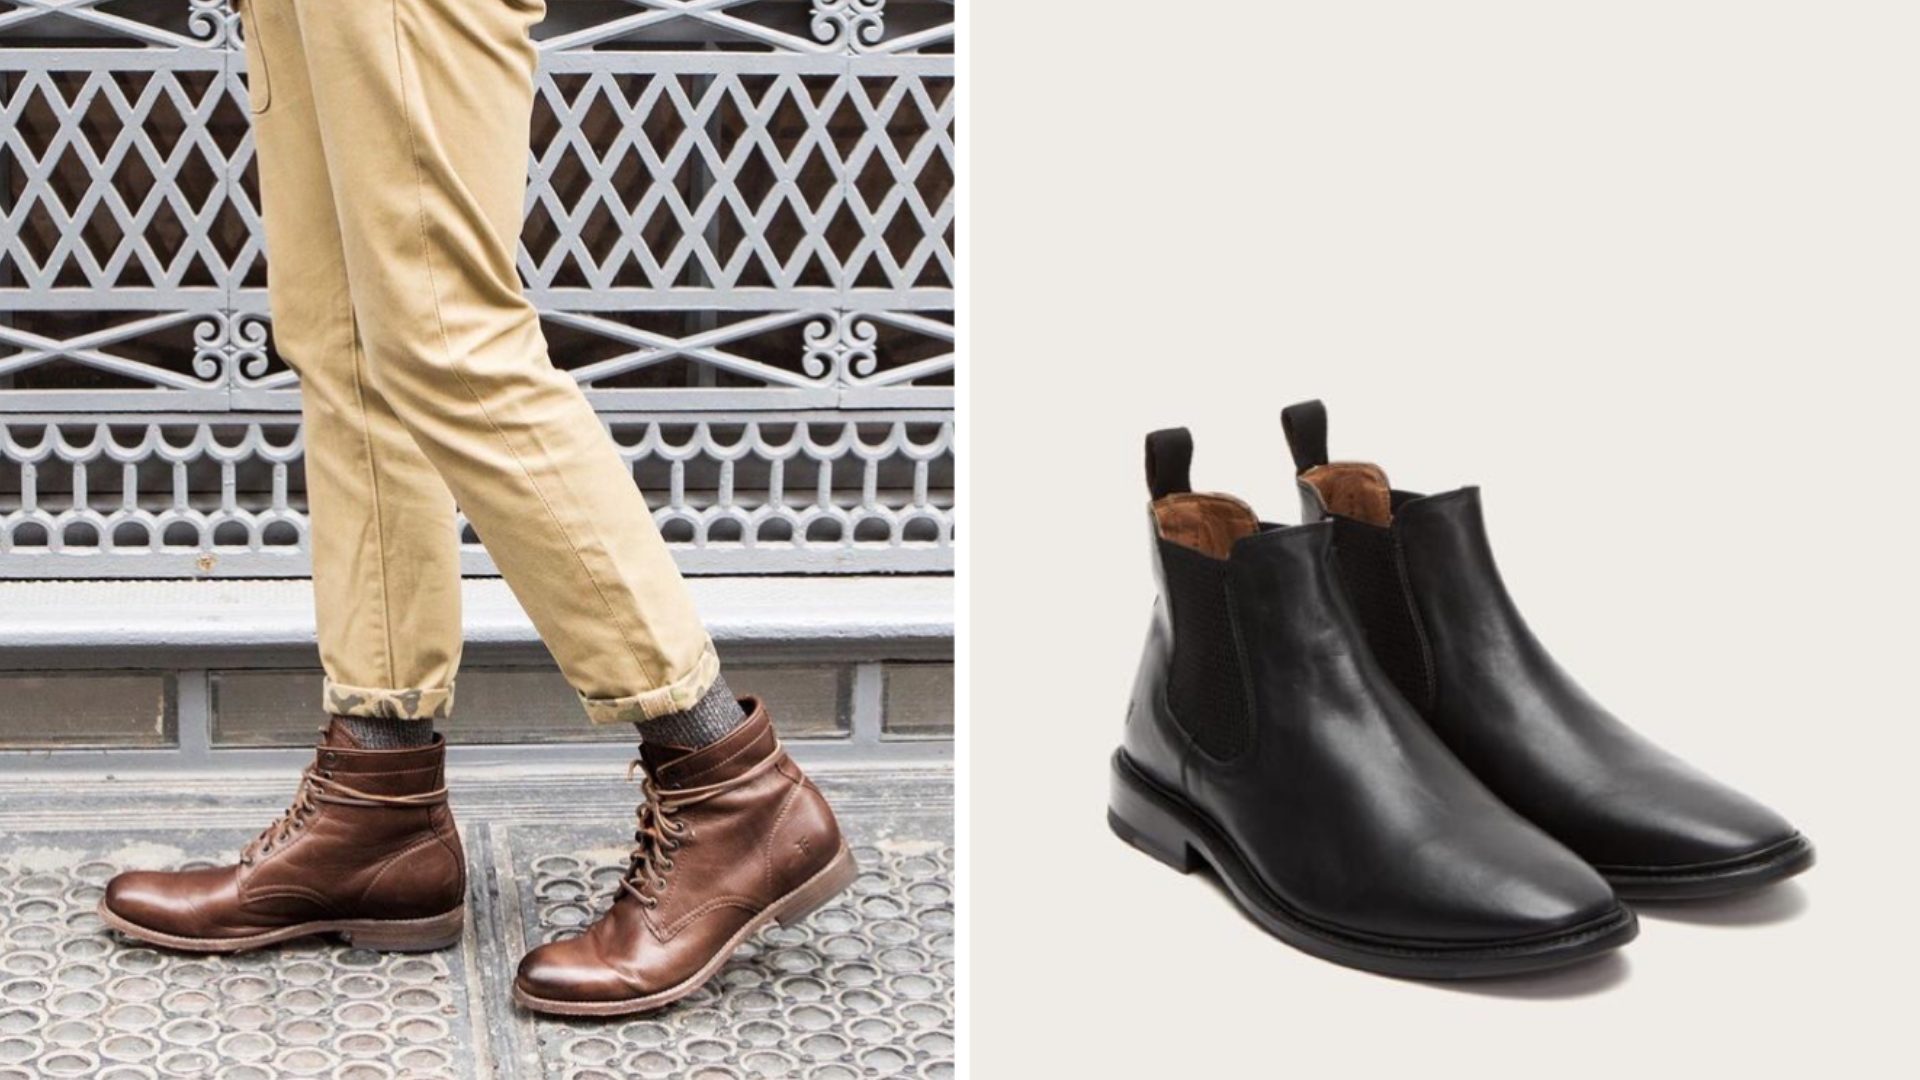 SaleSpy: Our Top Picks For Men At The Boot Blowout Online Sale